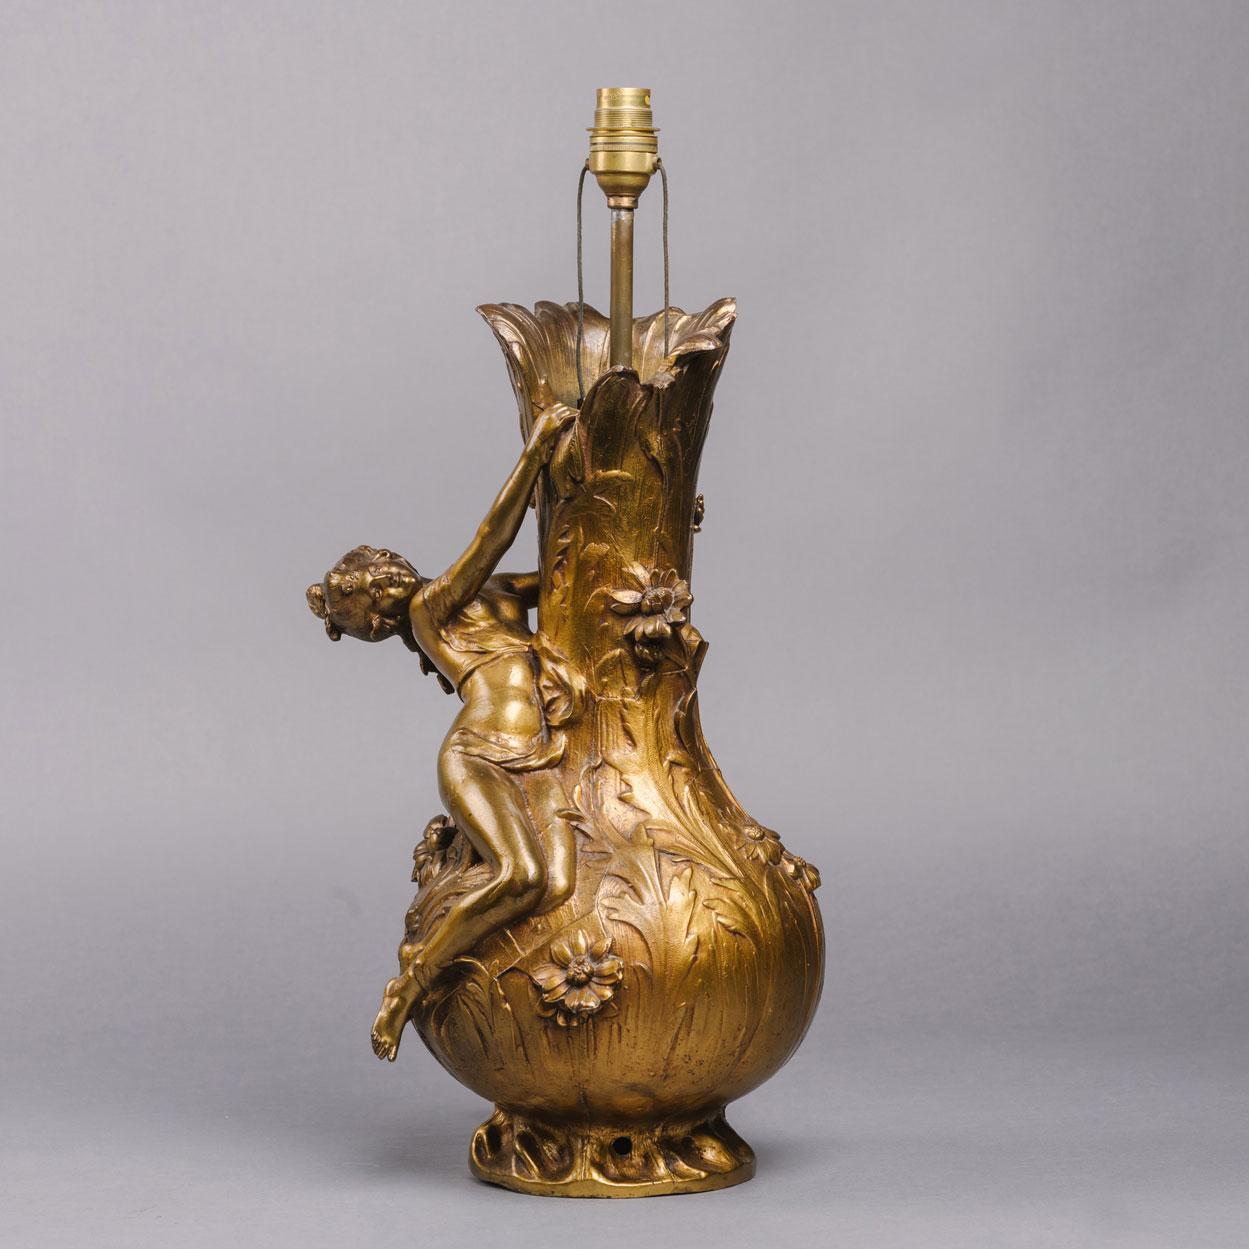 An Art Nouveau Gilt-Bronze Vase Depicting a Naiad, After Auguste Moreau, Now Mounted as a Lamp.

Signed to the body 'Aug Moreau'. 

French, Circa 1900. 

Louis Auguste Moreau (1855 - 1919) was born in Paris on April 23, 1855.  He was the son of